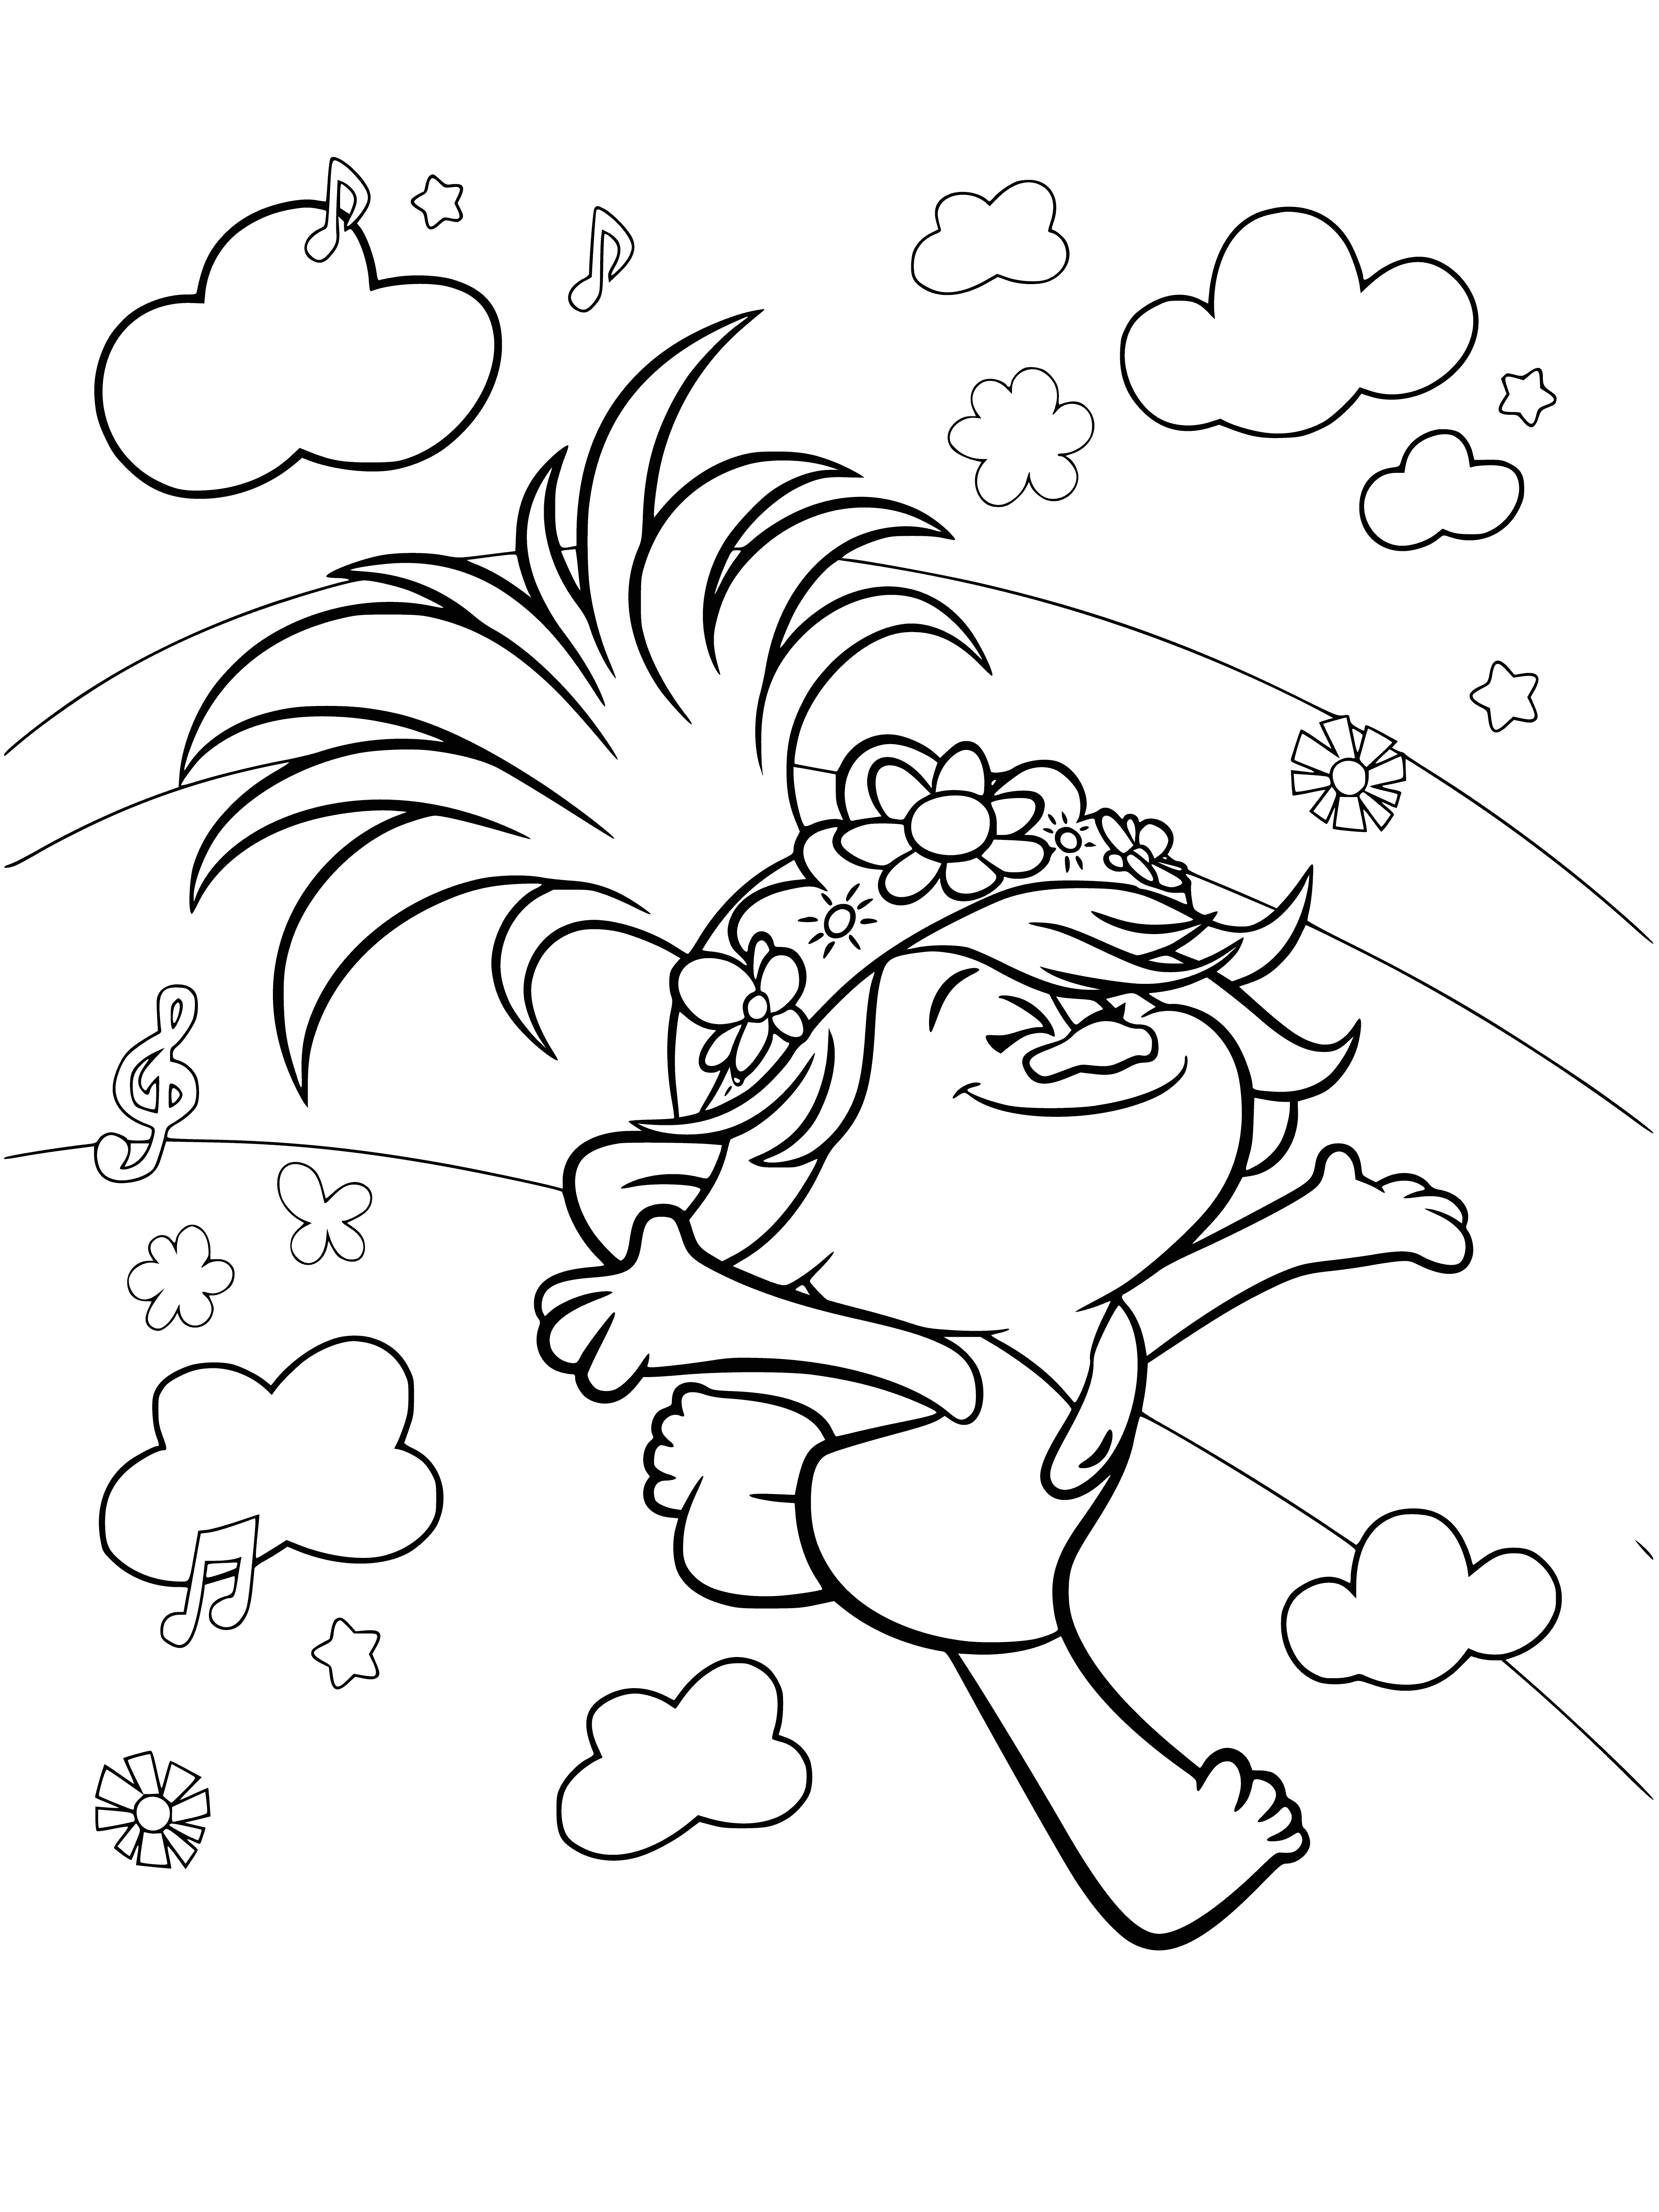 coloring page: Queen Rosette is a large troll with a big head, small eyes, pink dress, ribbon, jewelry, and scepter.